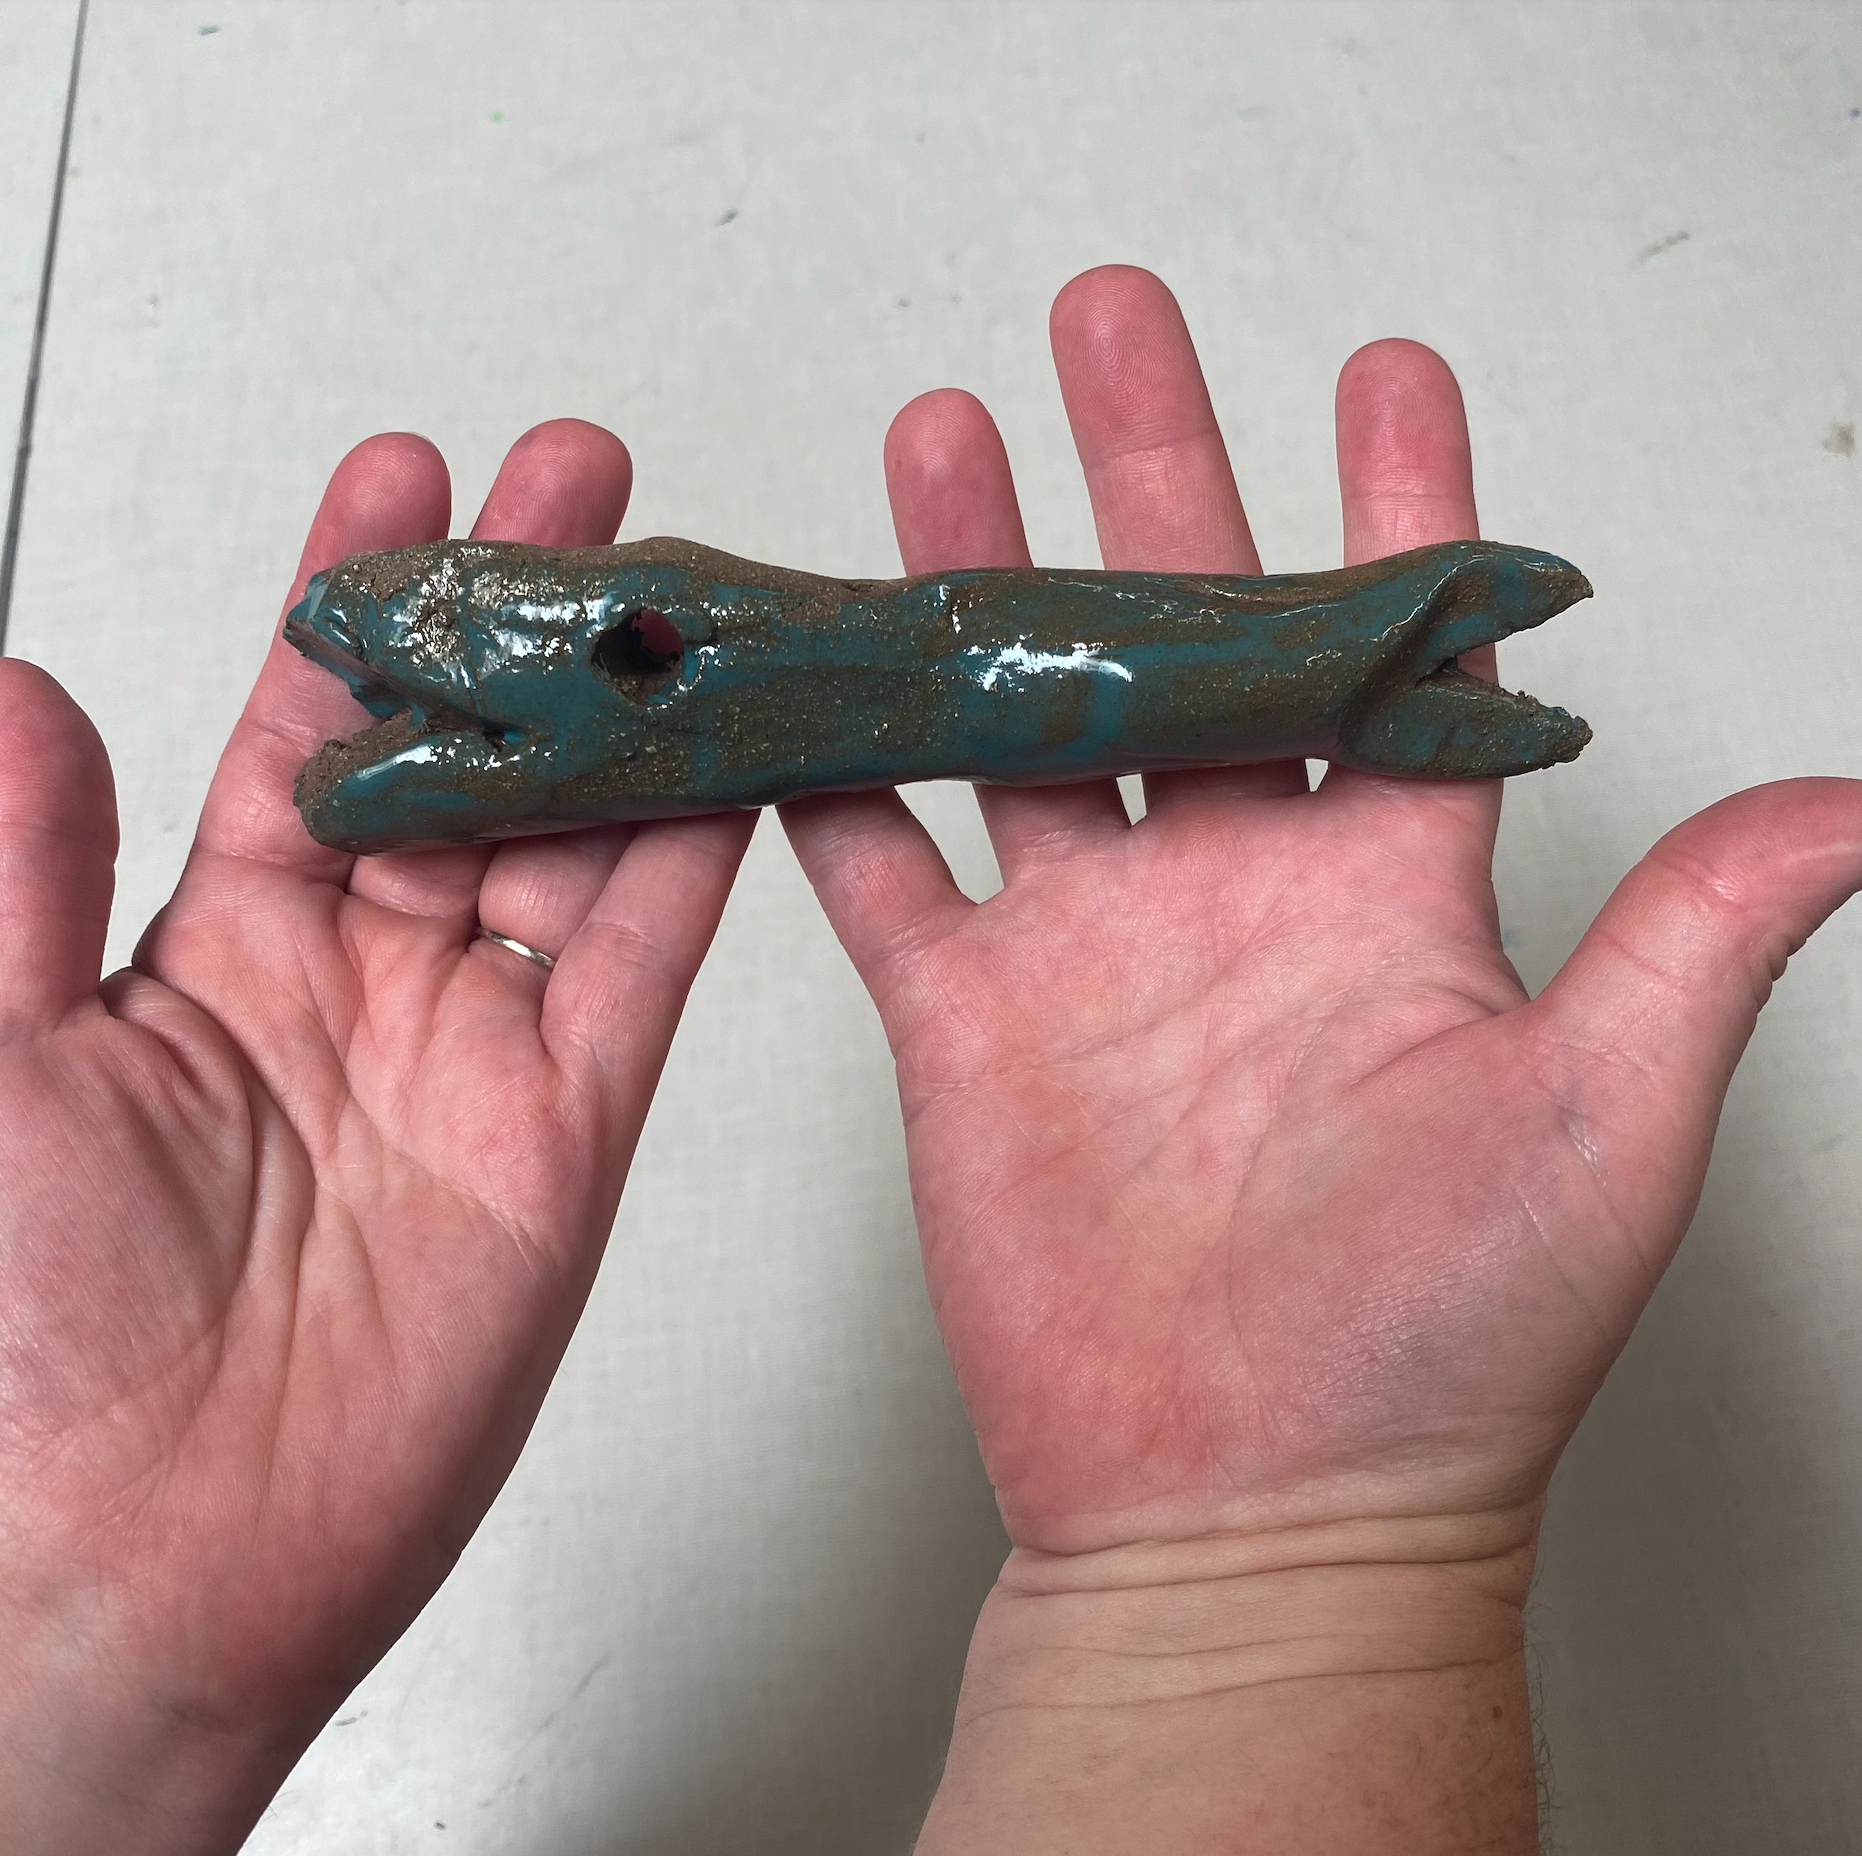 A person holds a small green fish-shaped ceramic sculpture.